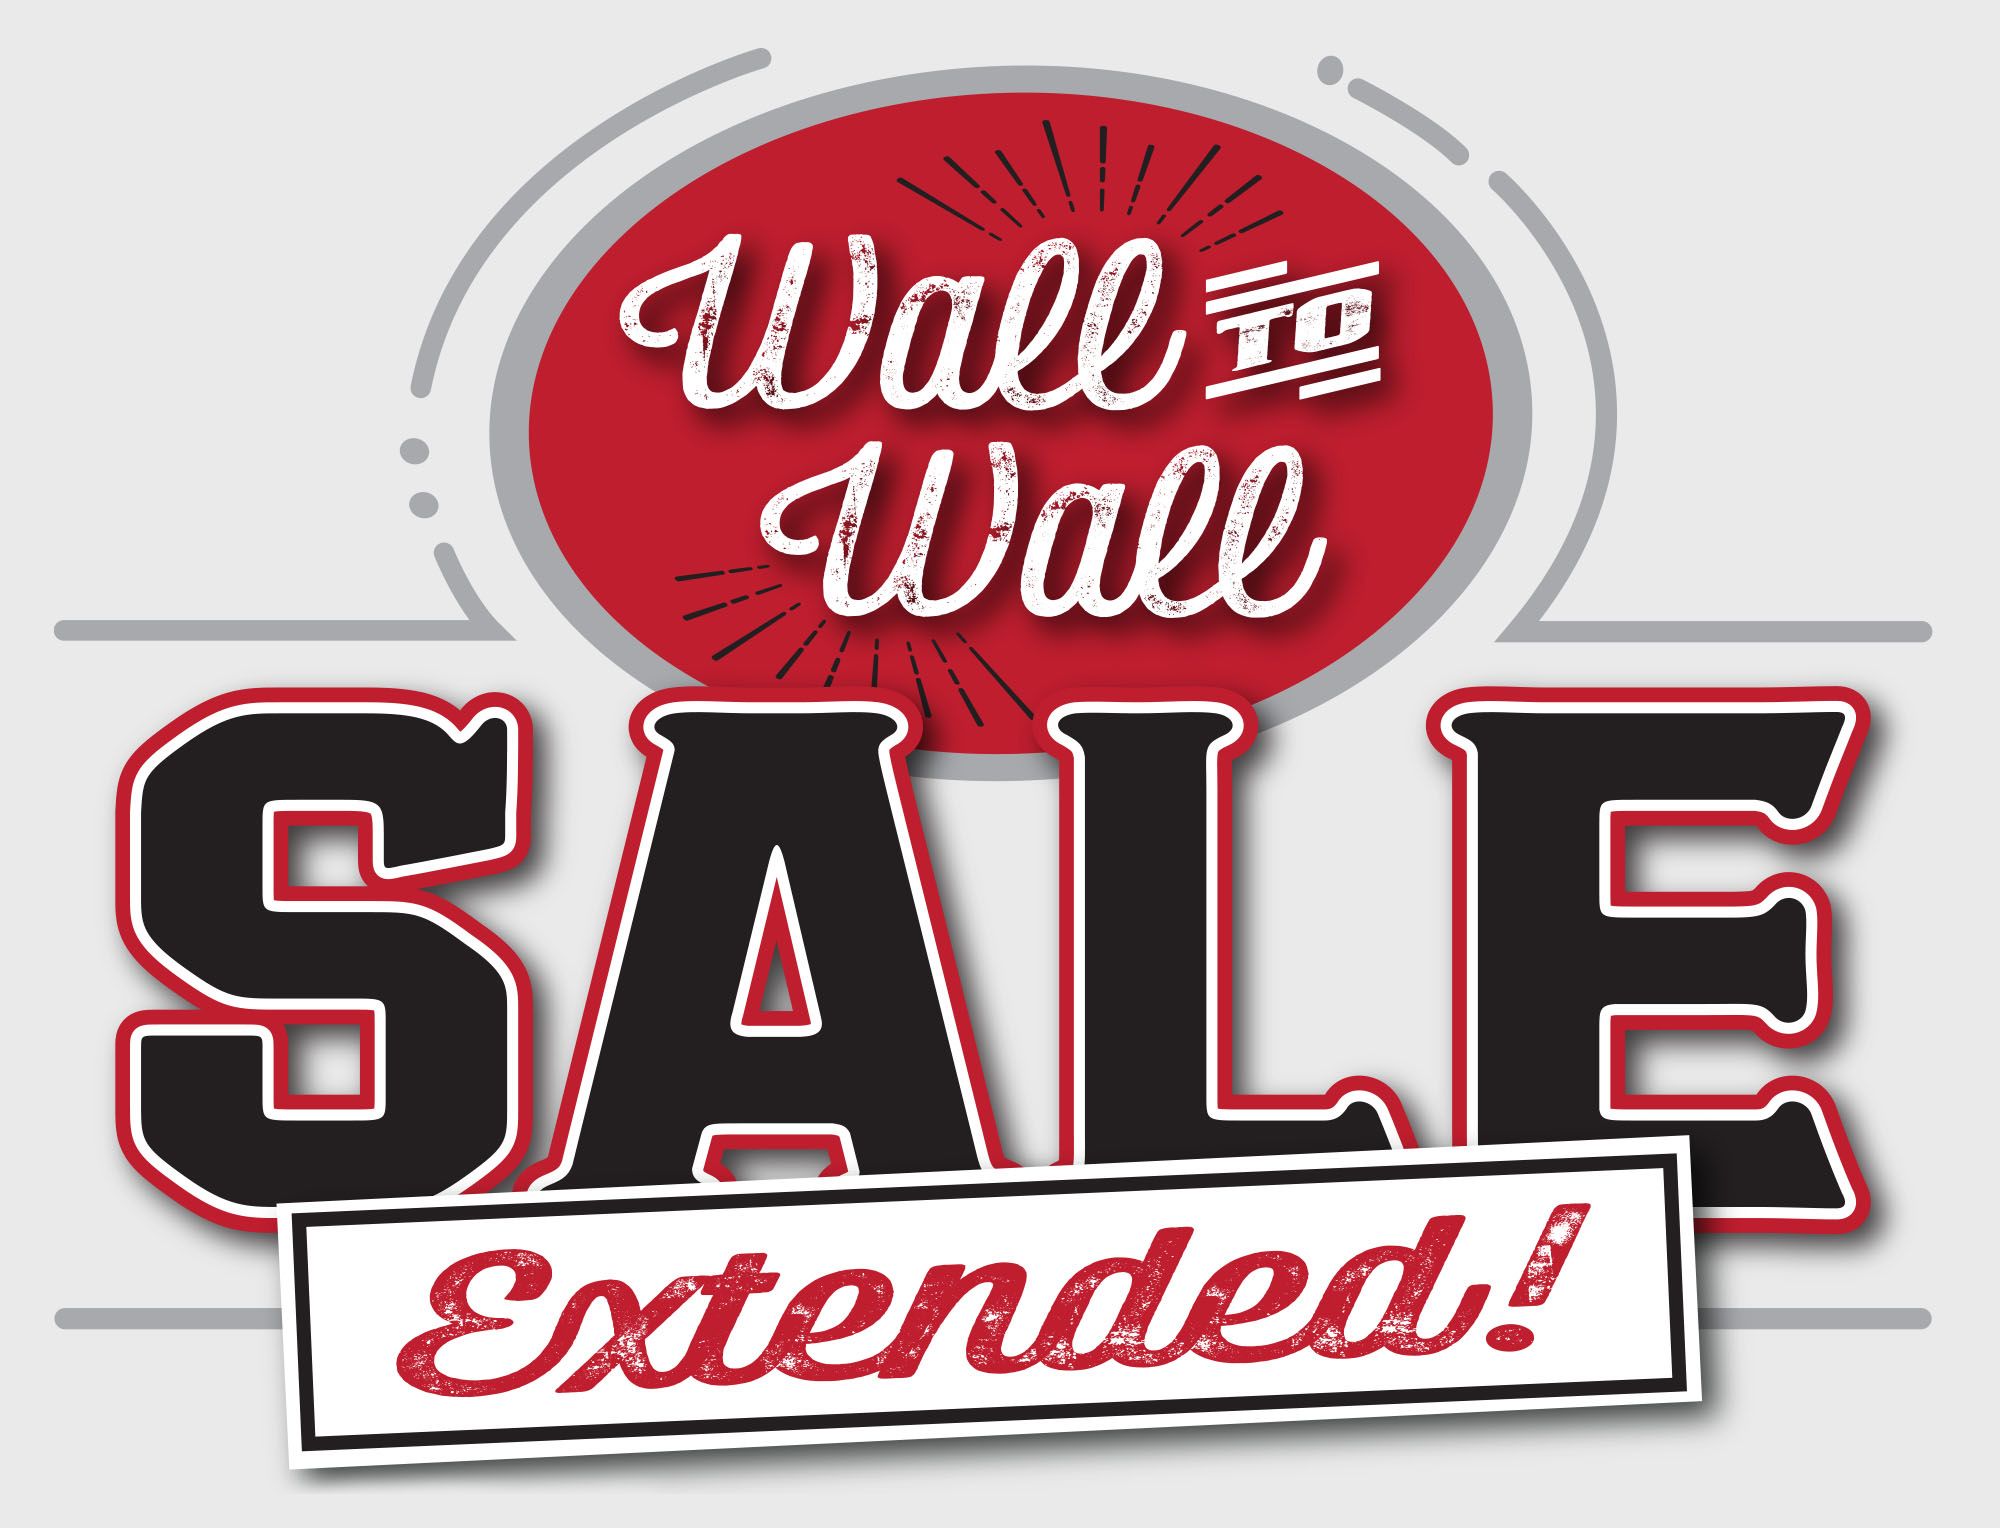 Wall to Wall Sale